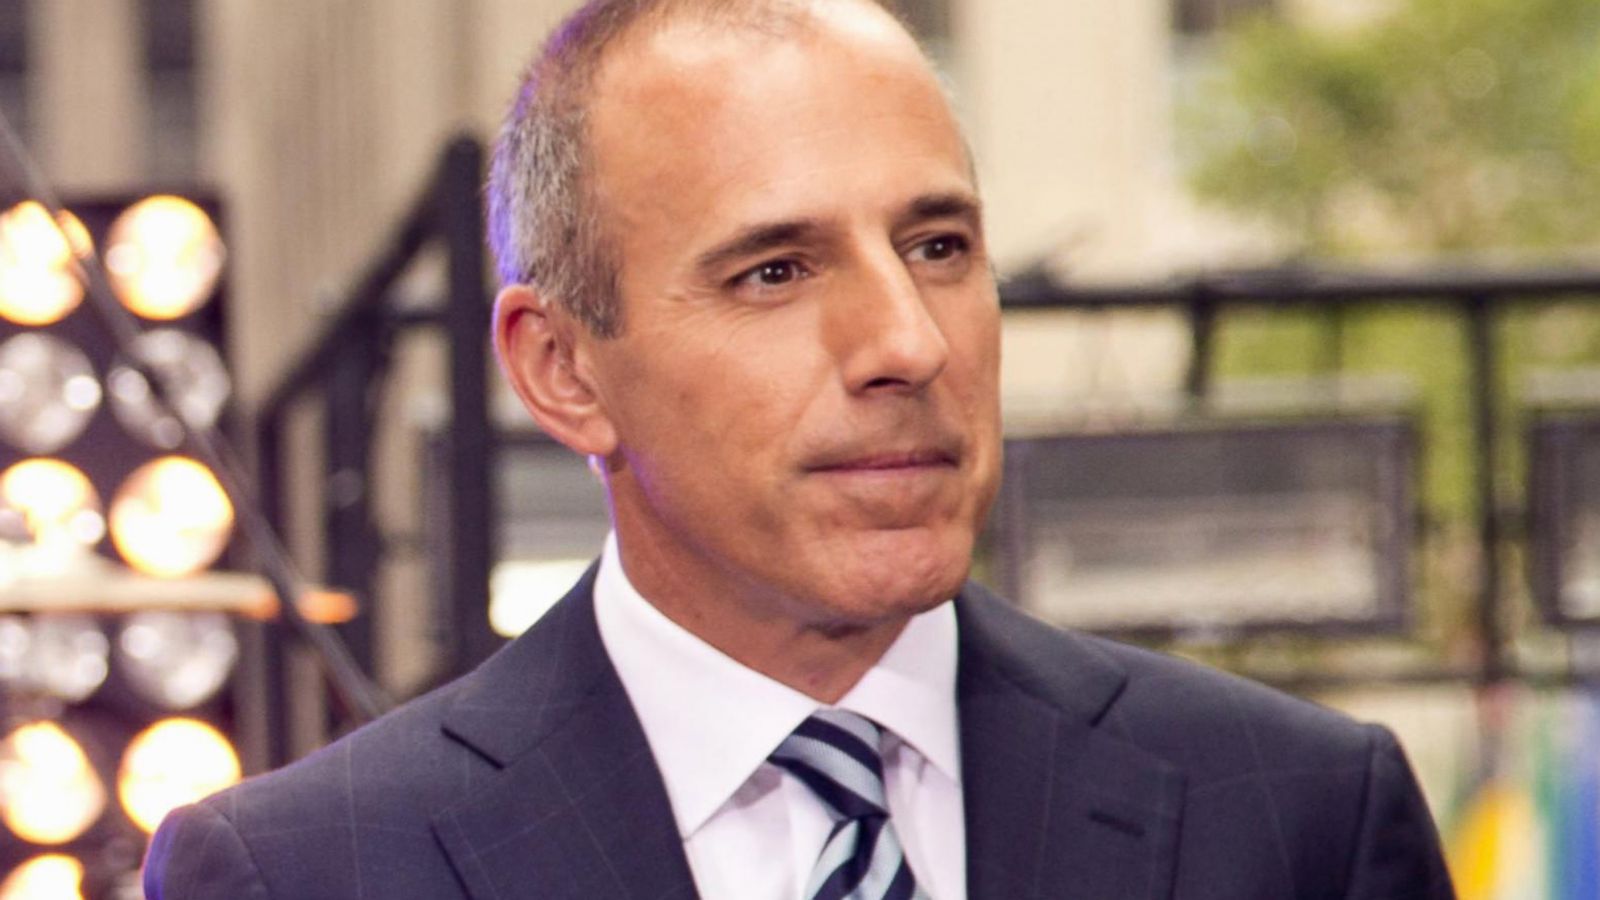 Matt Lauer fired for alleged 'inappropriate sexual behavior in the